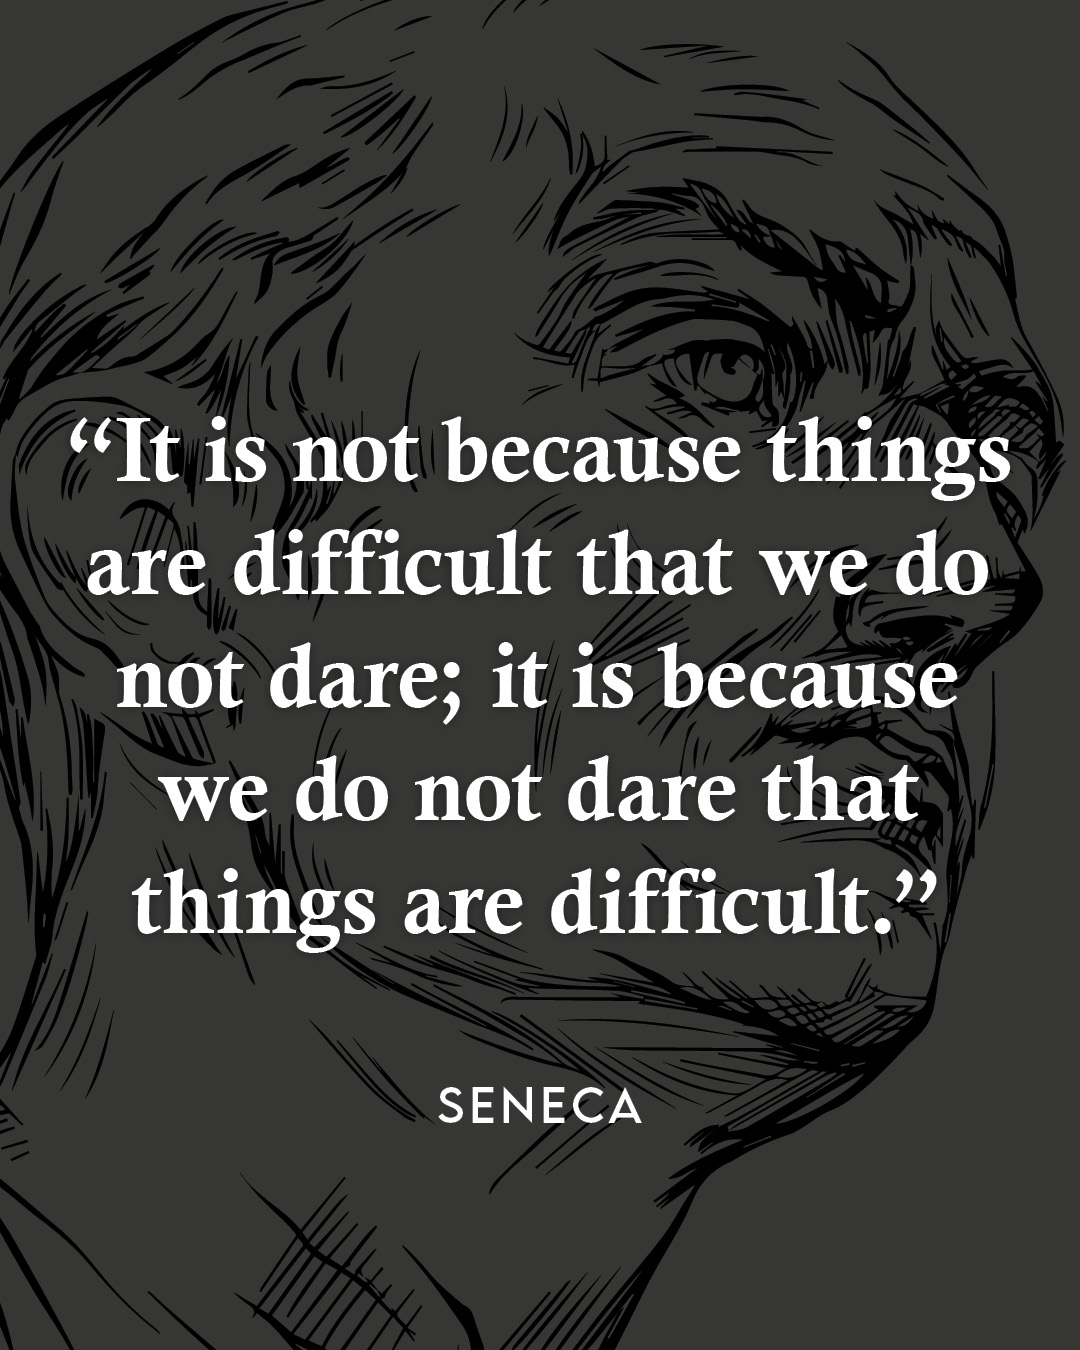 It is not because things are difficult that we do not dare, it is because we do not dare that things are difficult.